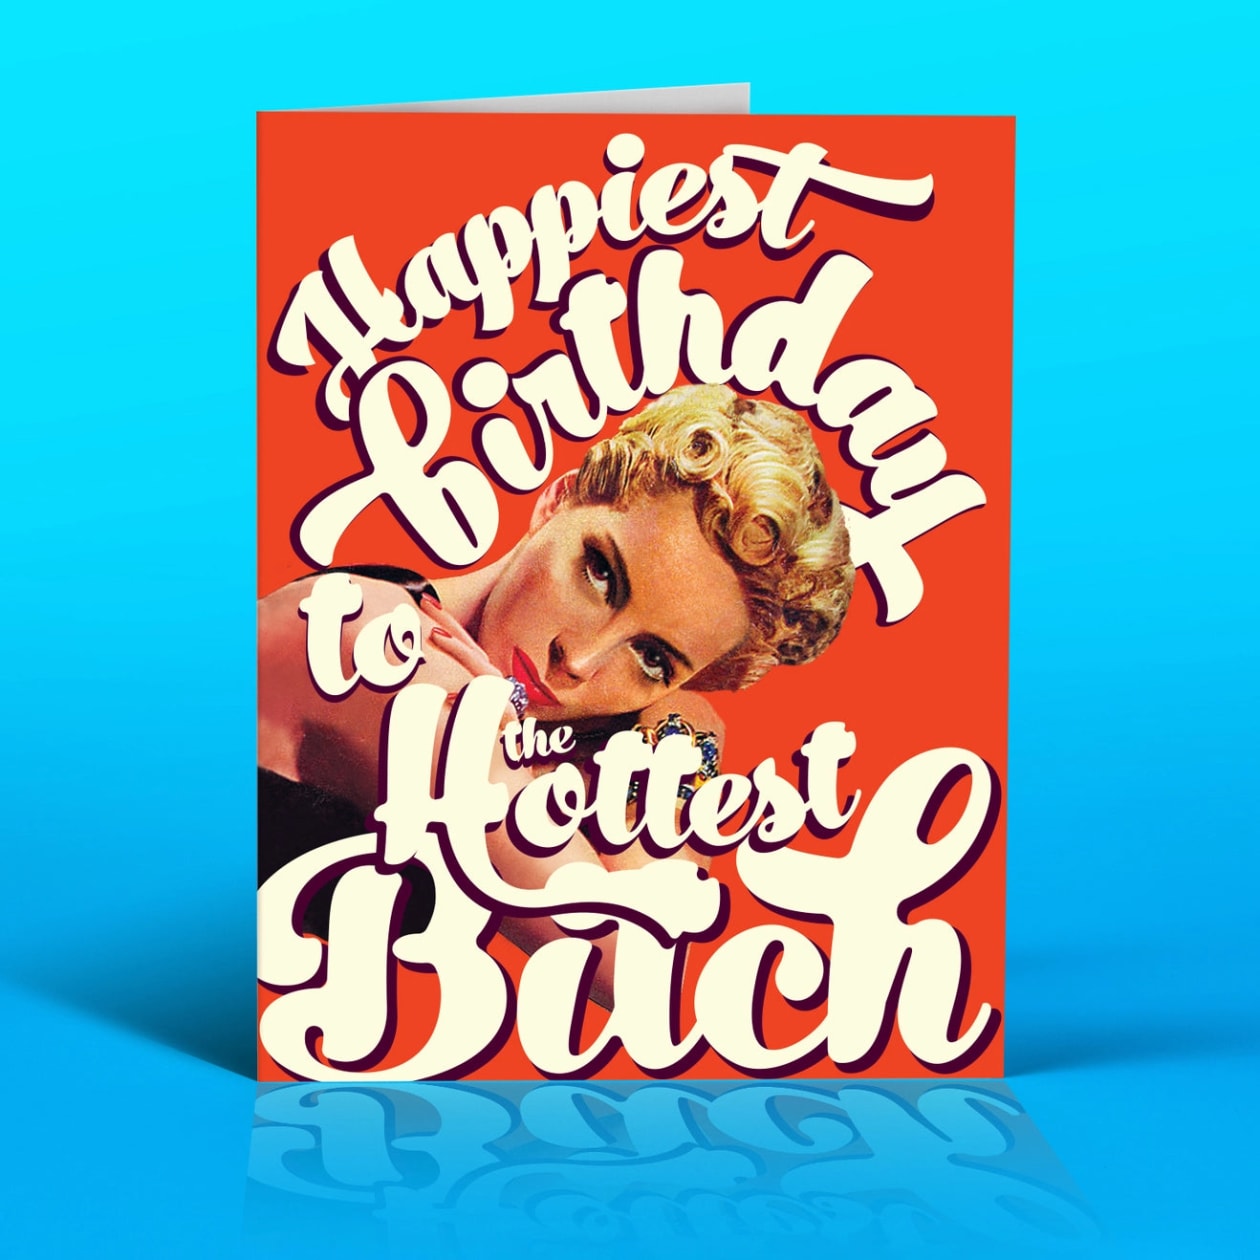 Happiest Birthday To The Hottest B*tch Greeting Card